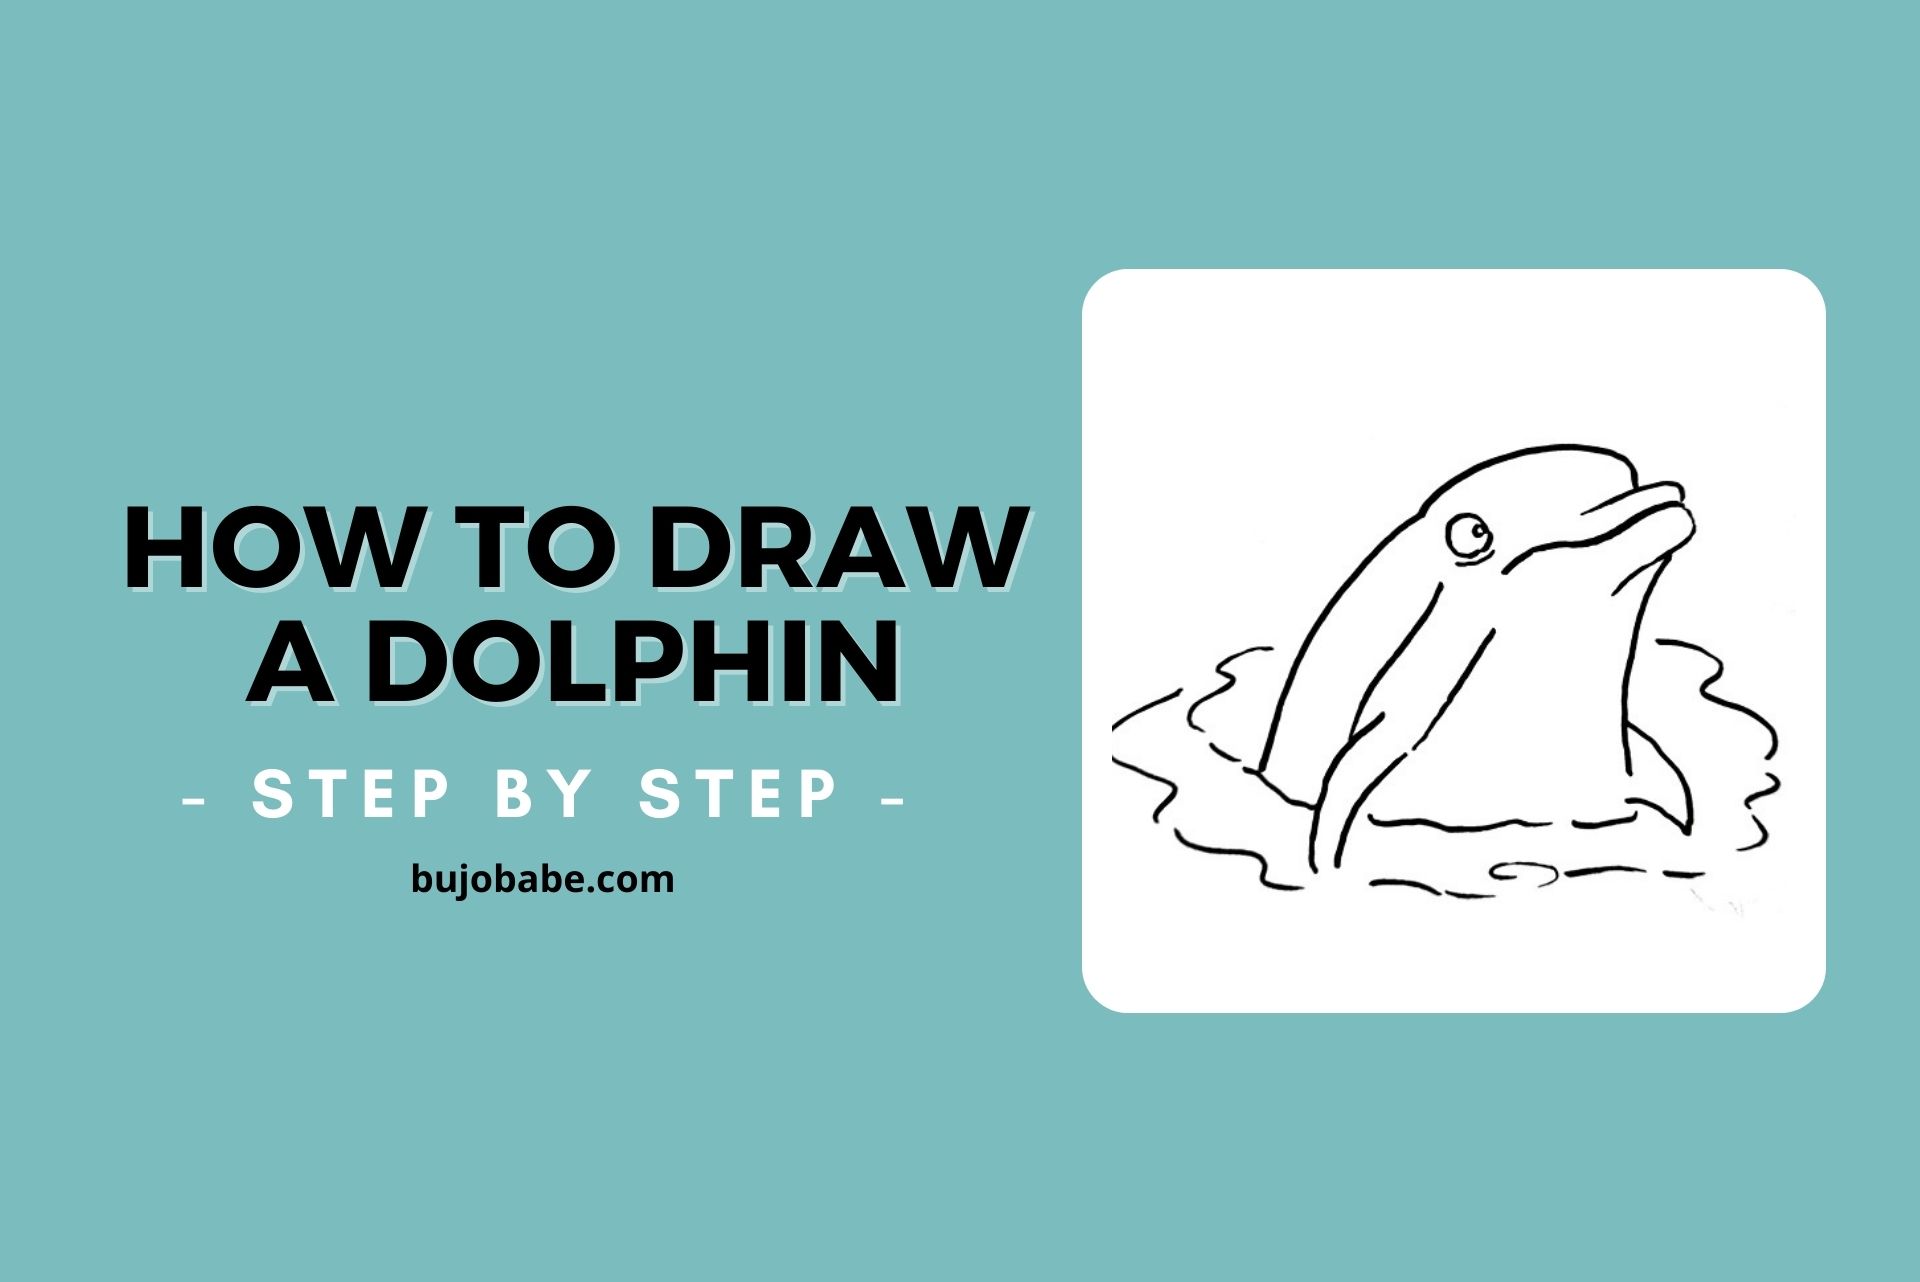 how to draw a dolphin, step by step